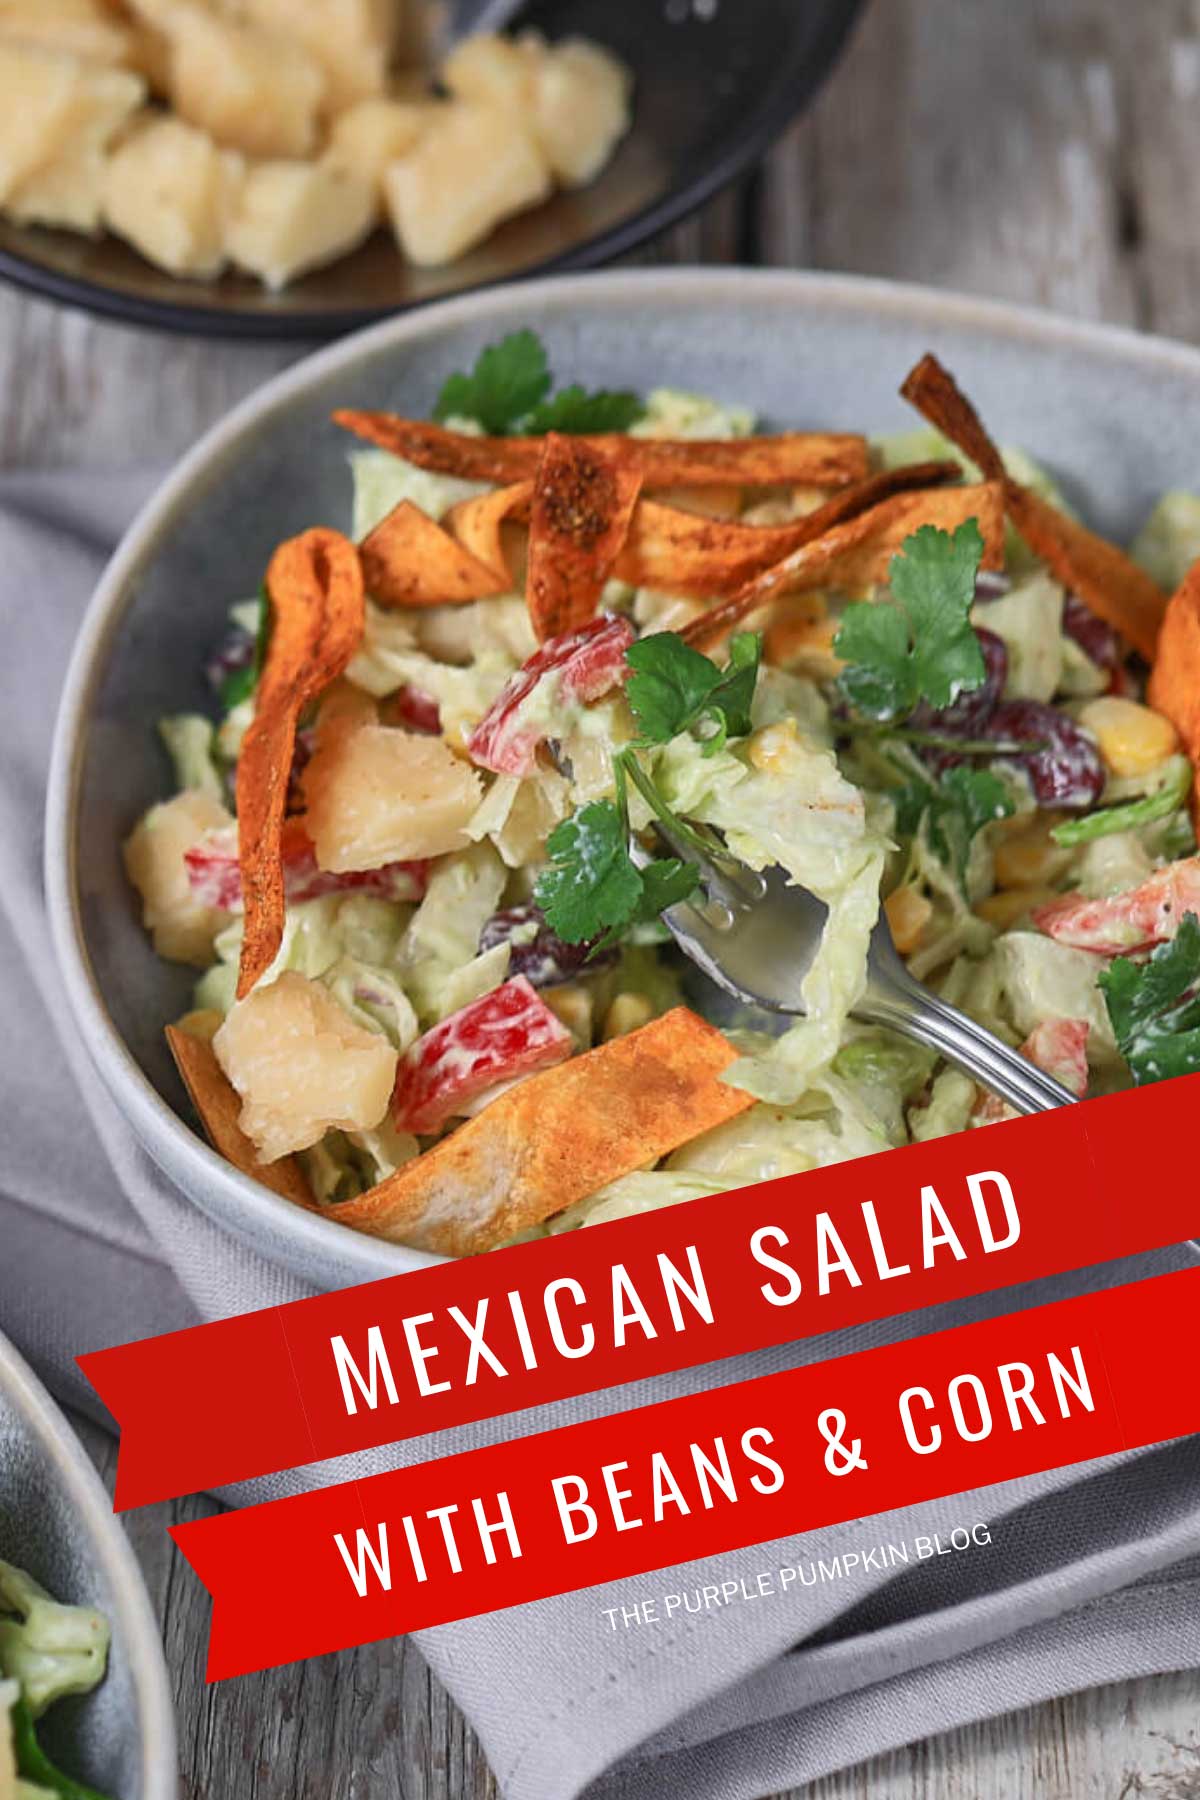 Bowl of salad - beans, corn, lettuce, bell peppers - tossed with avocado dressing and garnished with cheese and crispy tortilla strips. Text overlay says: Mexican Salad with Beans and Corn